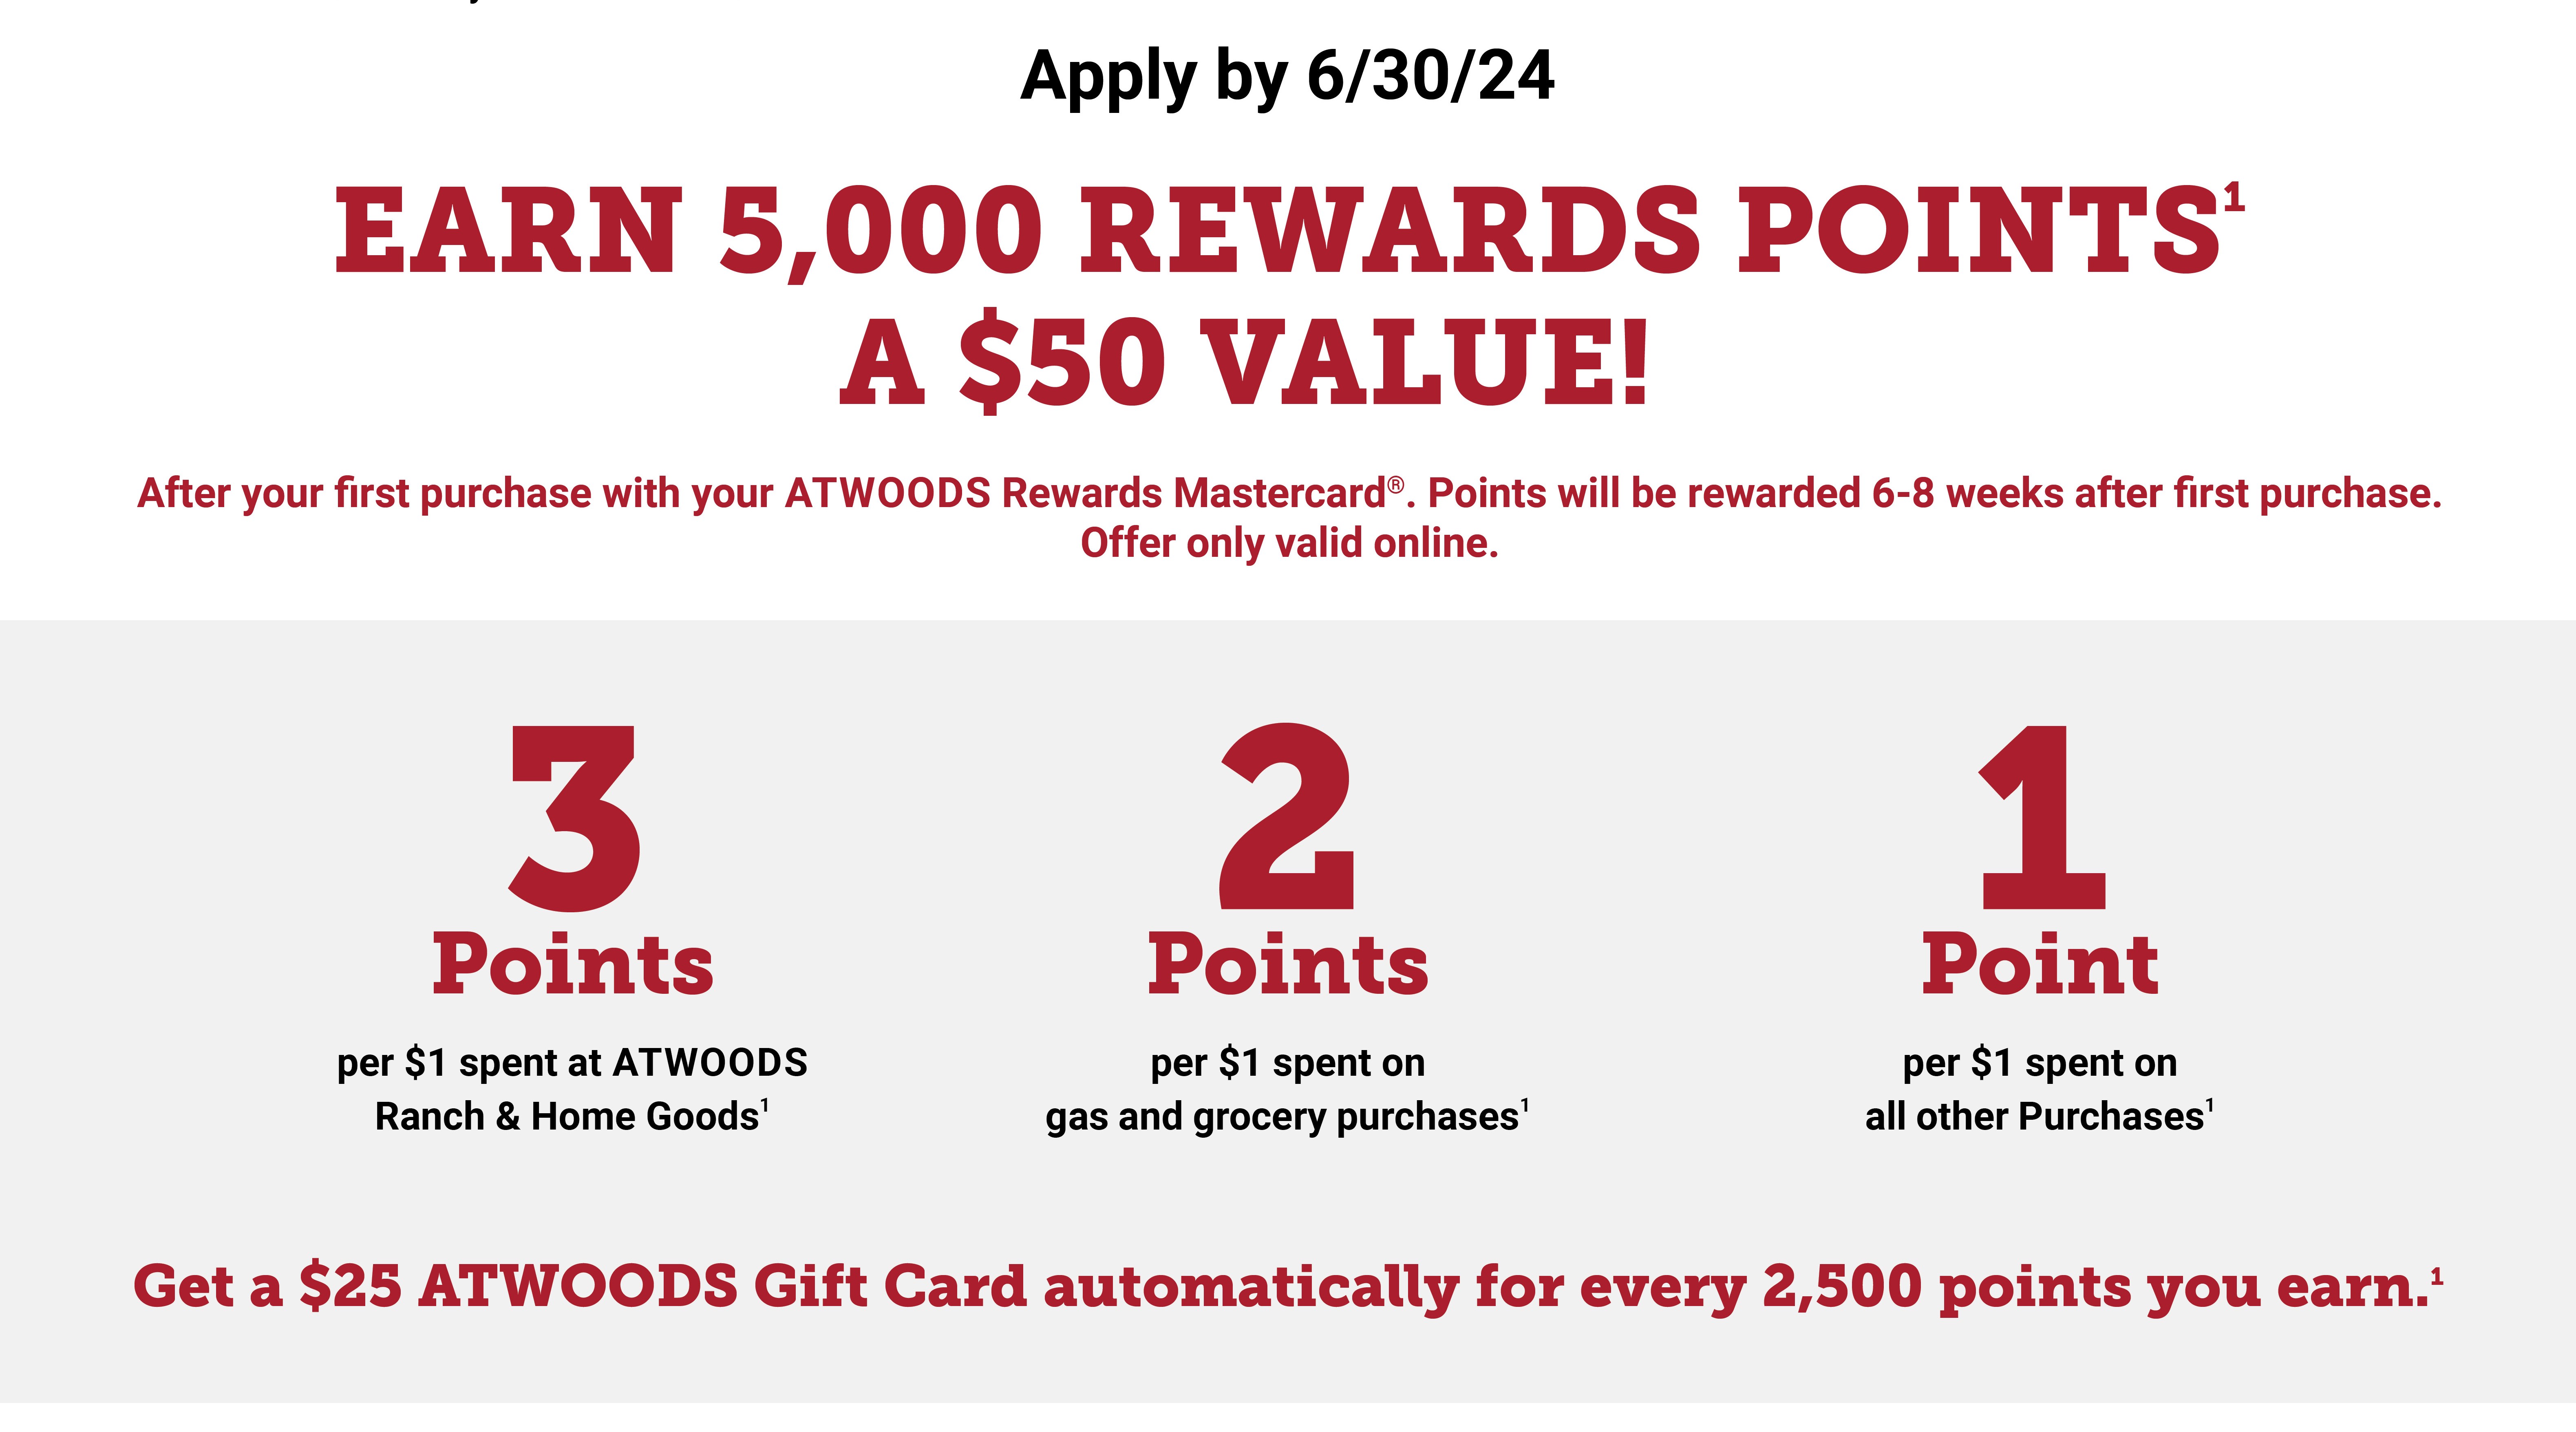 Earn 5,000 Rewards Points (a $50 value) After your first purchase with your Atwoods Rewards Mastercard.  Points will be rewarded 6-8 weeks after first purchase.  Offer only valid online.  Aplly by 12/31/23. 3 points per $1 spent at Atwoods Ranch and Home Goods. 2 points per $1 spent on gas and gorcery purchases. 1 Point per $1 spent on all other purchases.  Get a $25 Atwoods Gift Card automatically for every 2,500 pointd you earn. 